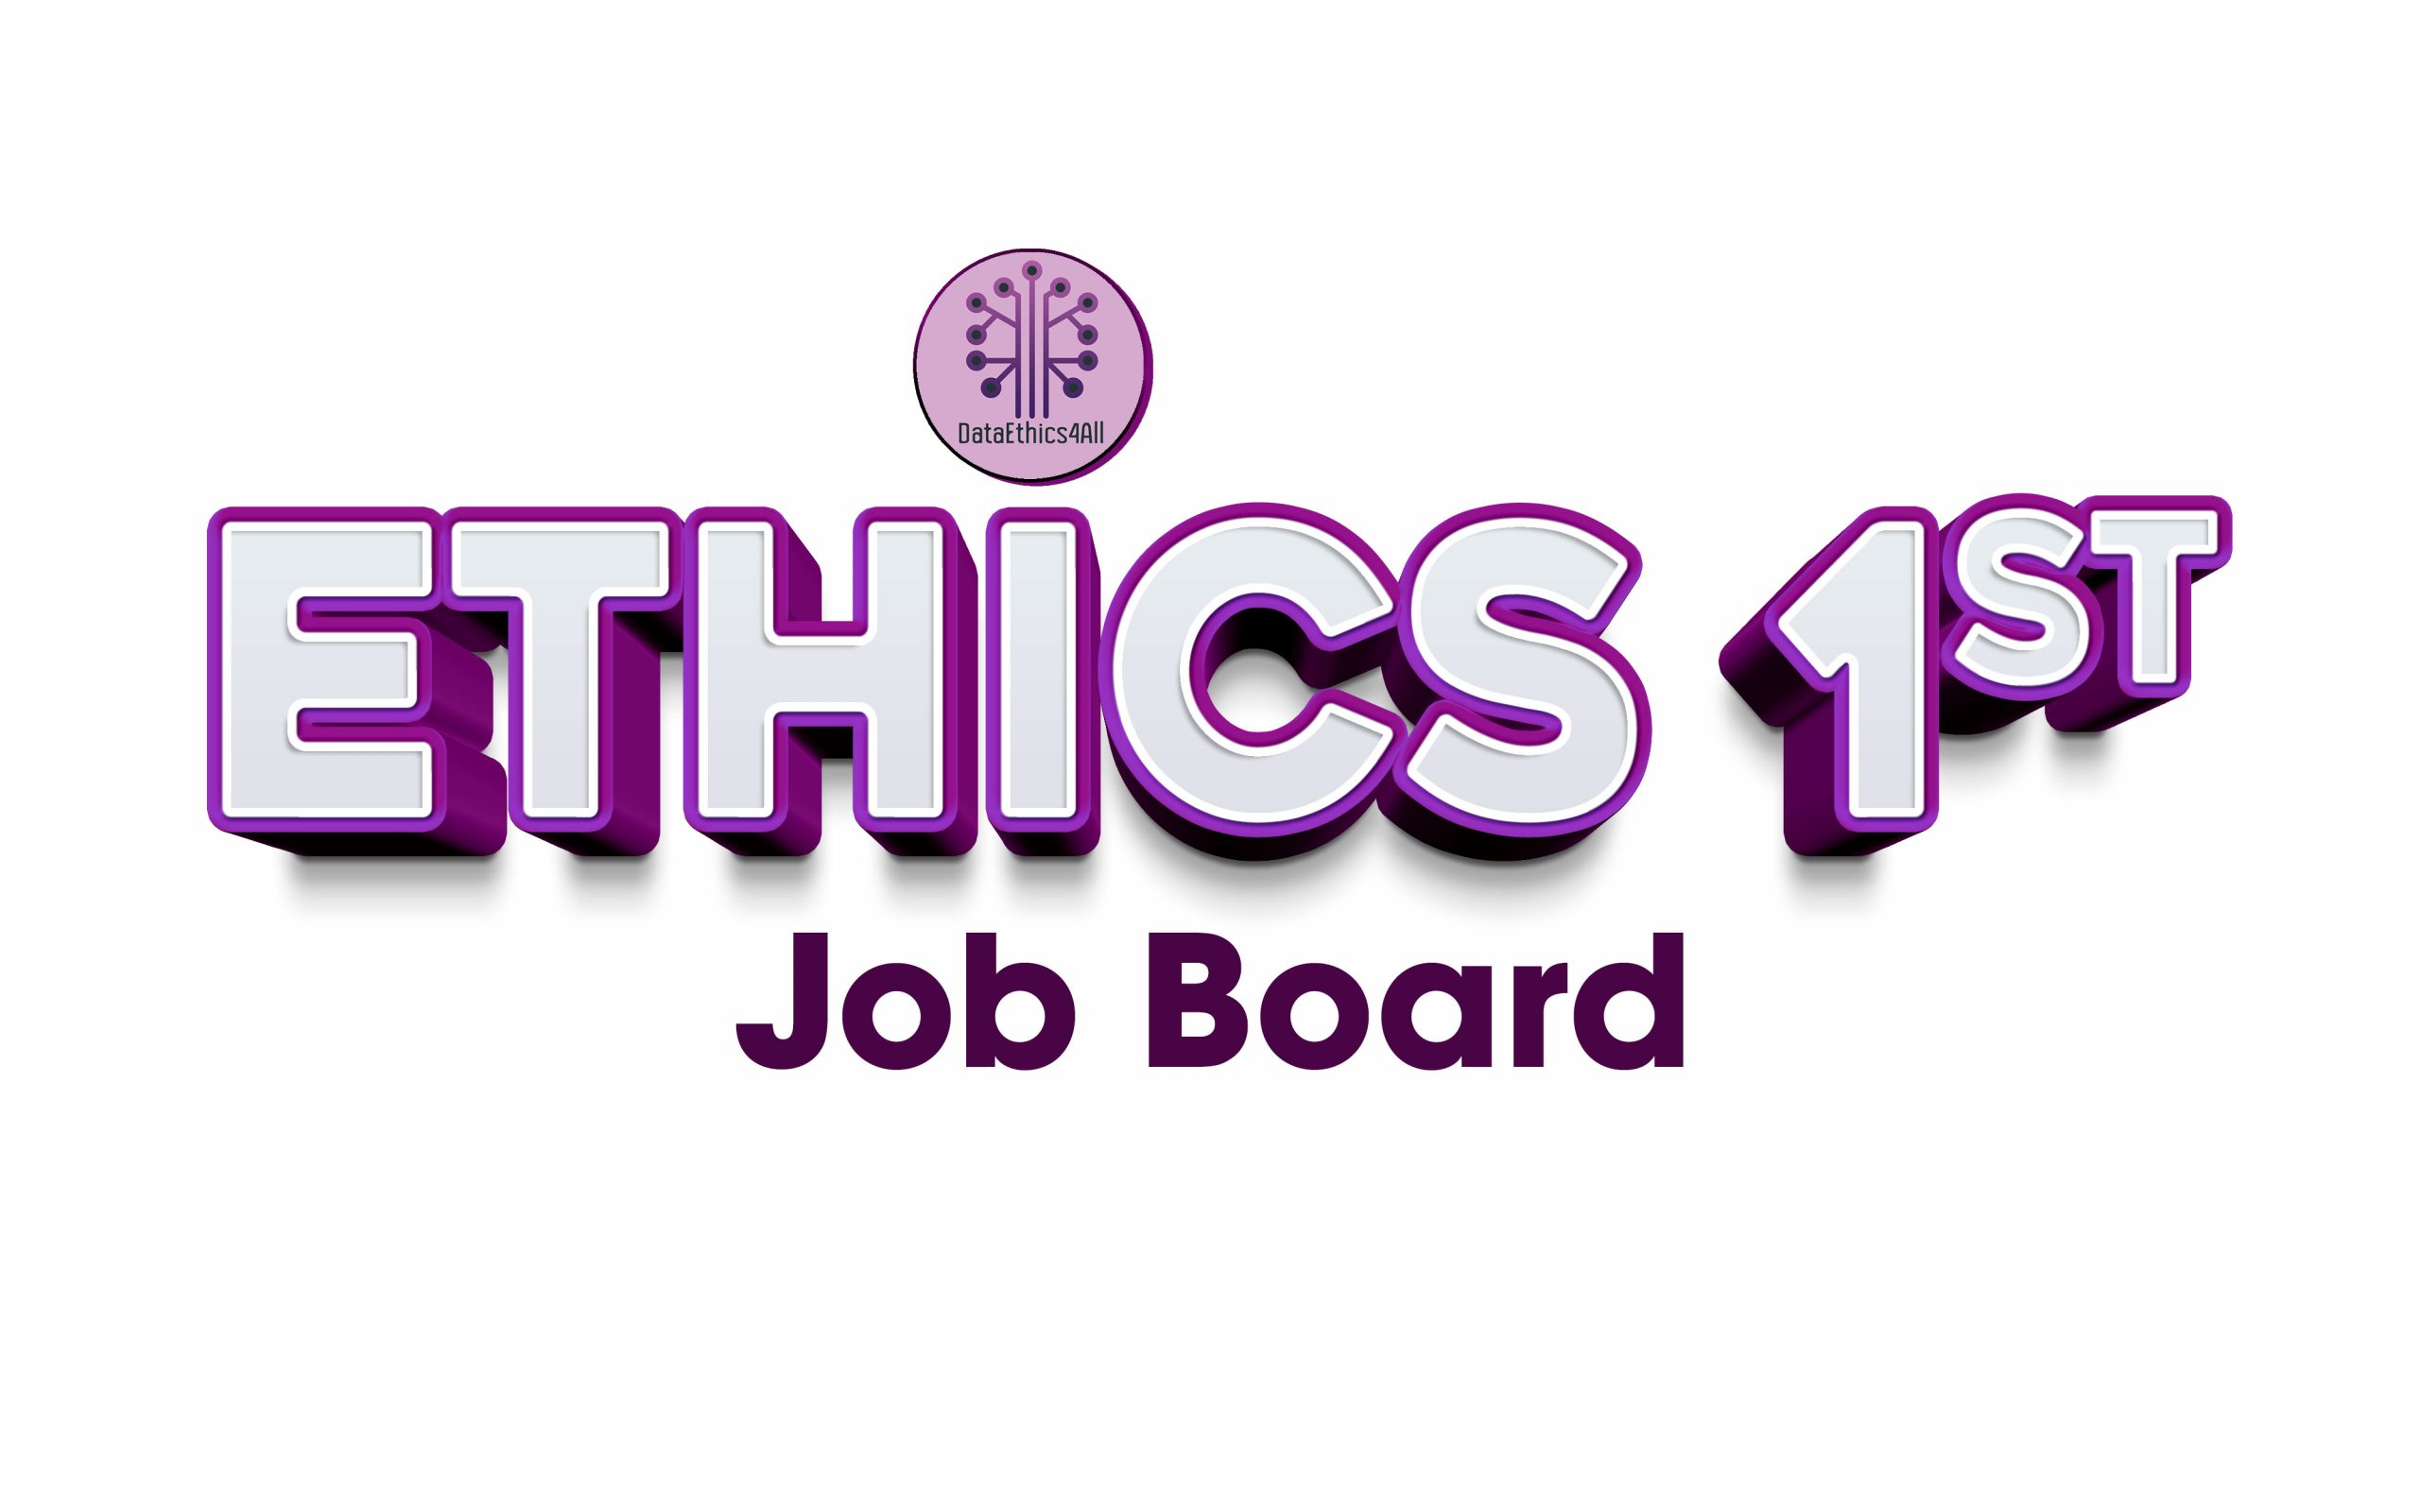 DataEthics4All Ethics-1st-Job Board - Be the first to know about Tech Ethics Opportunities in Data, Artificial Intelligence, HR, Policy, Marketing, Sales, Legal, IT